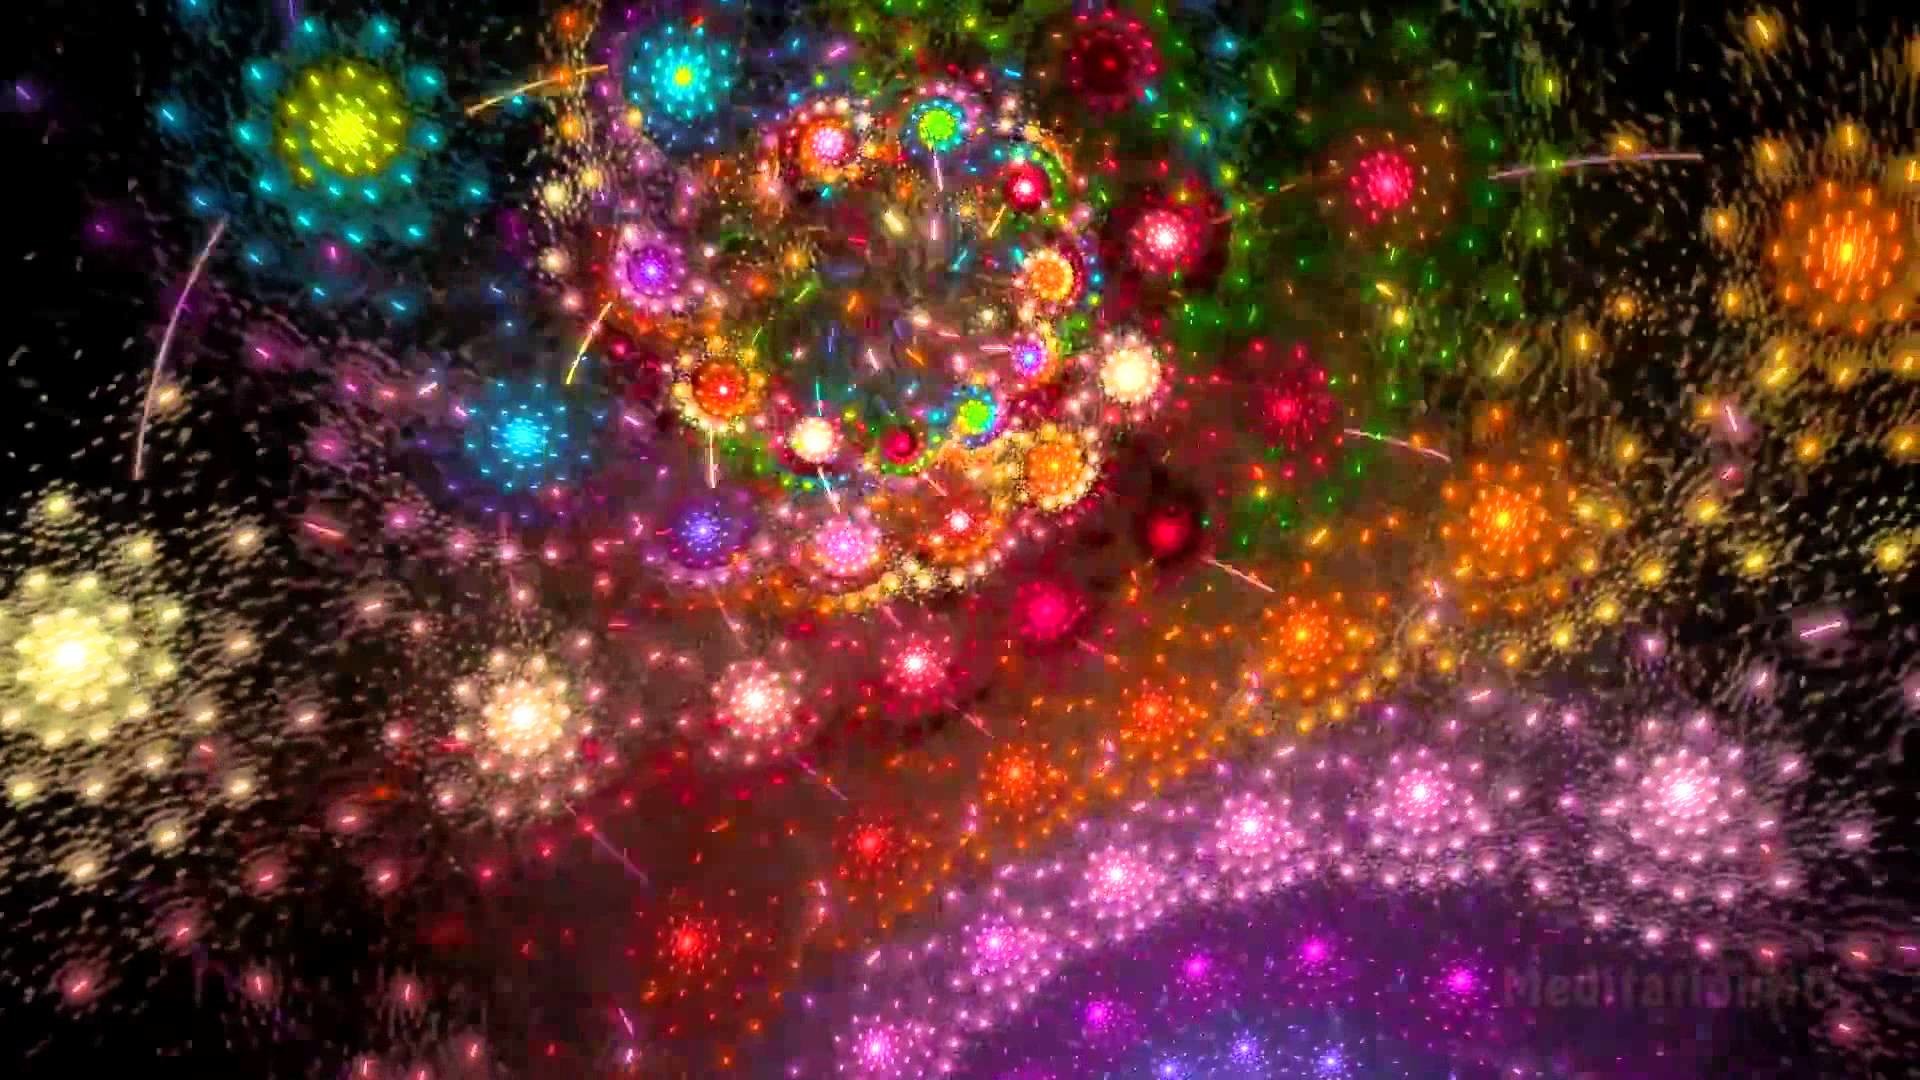 1920x1080 Electric Sheep in HD (Psy Dark Trance) 3 hour Fractal Animation (Full  Ver.2.0) - YouTube